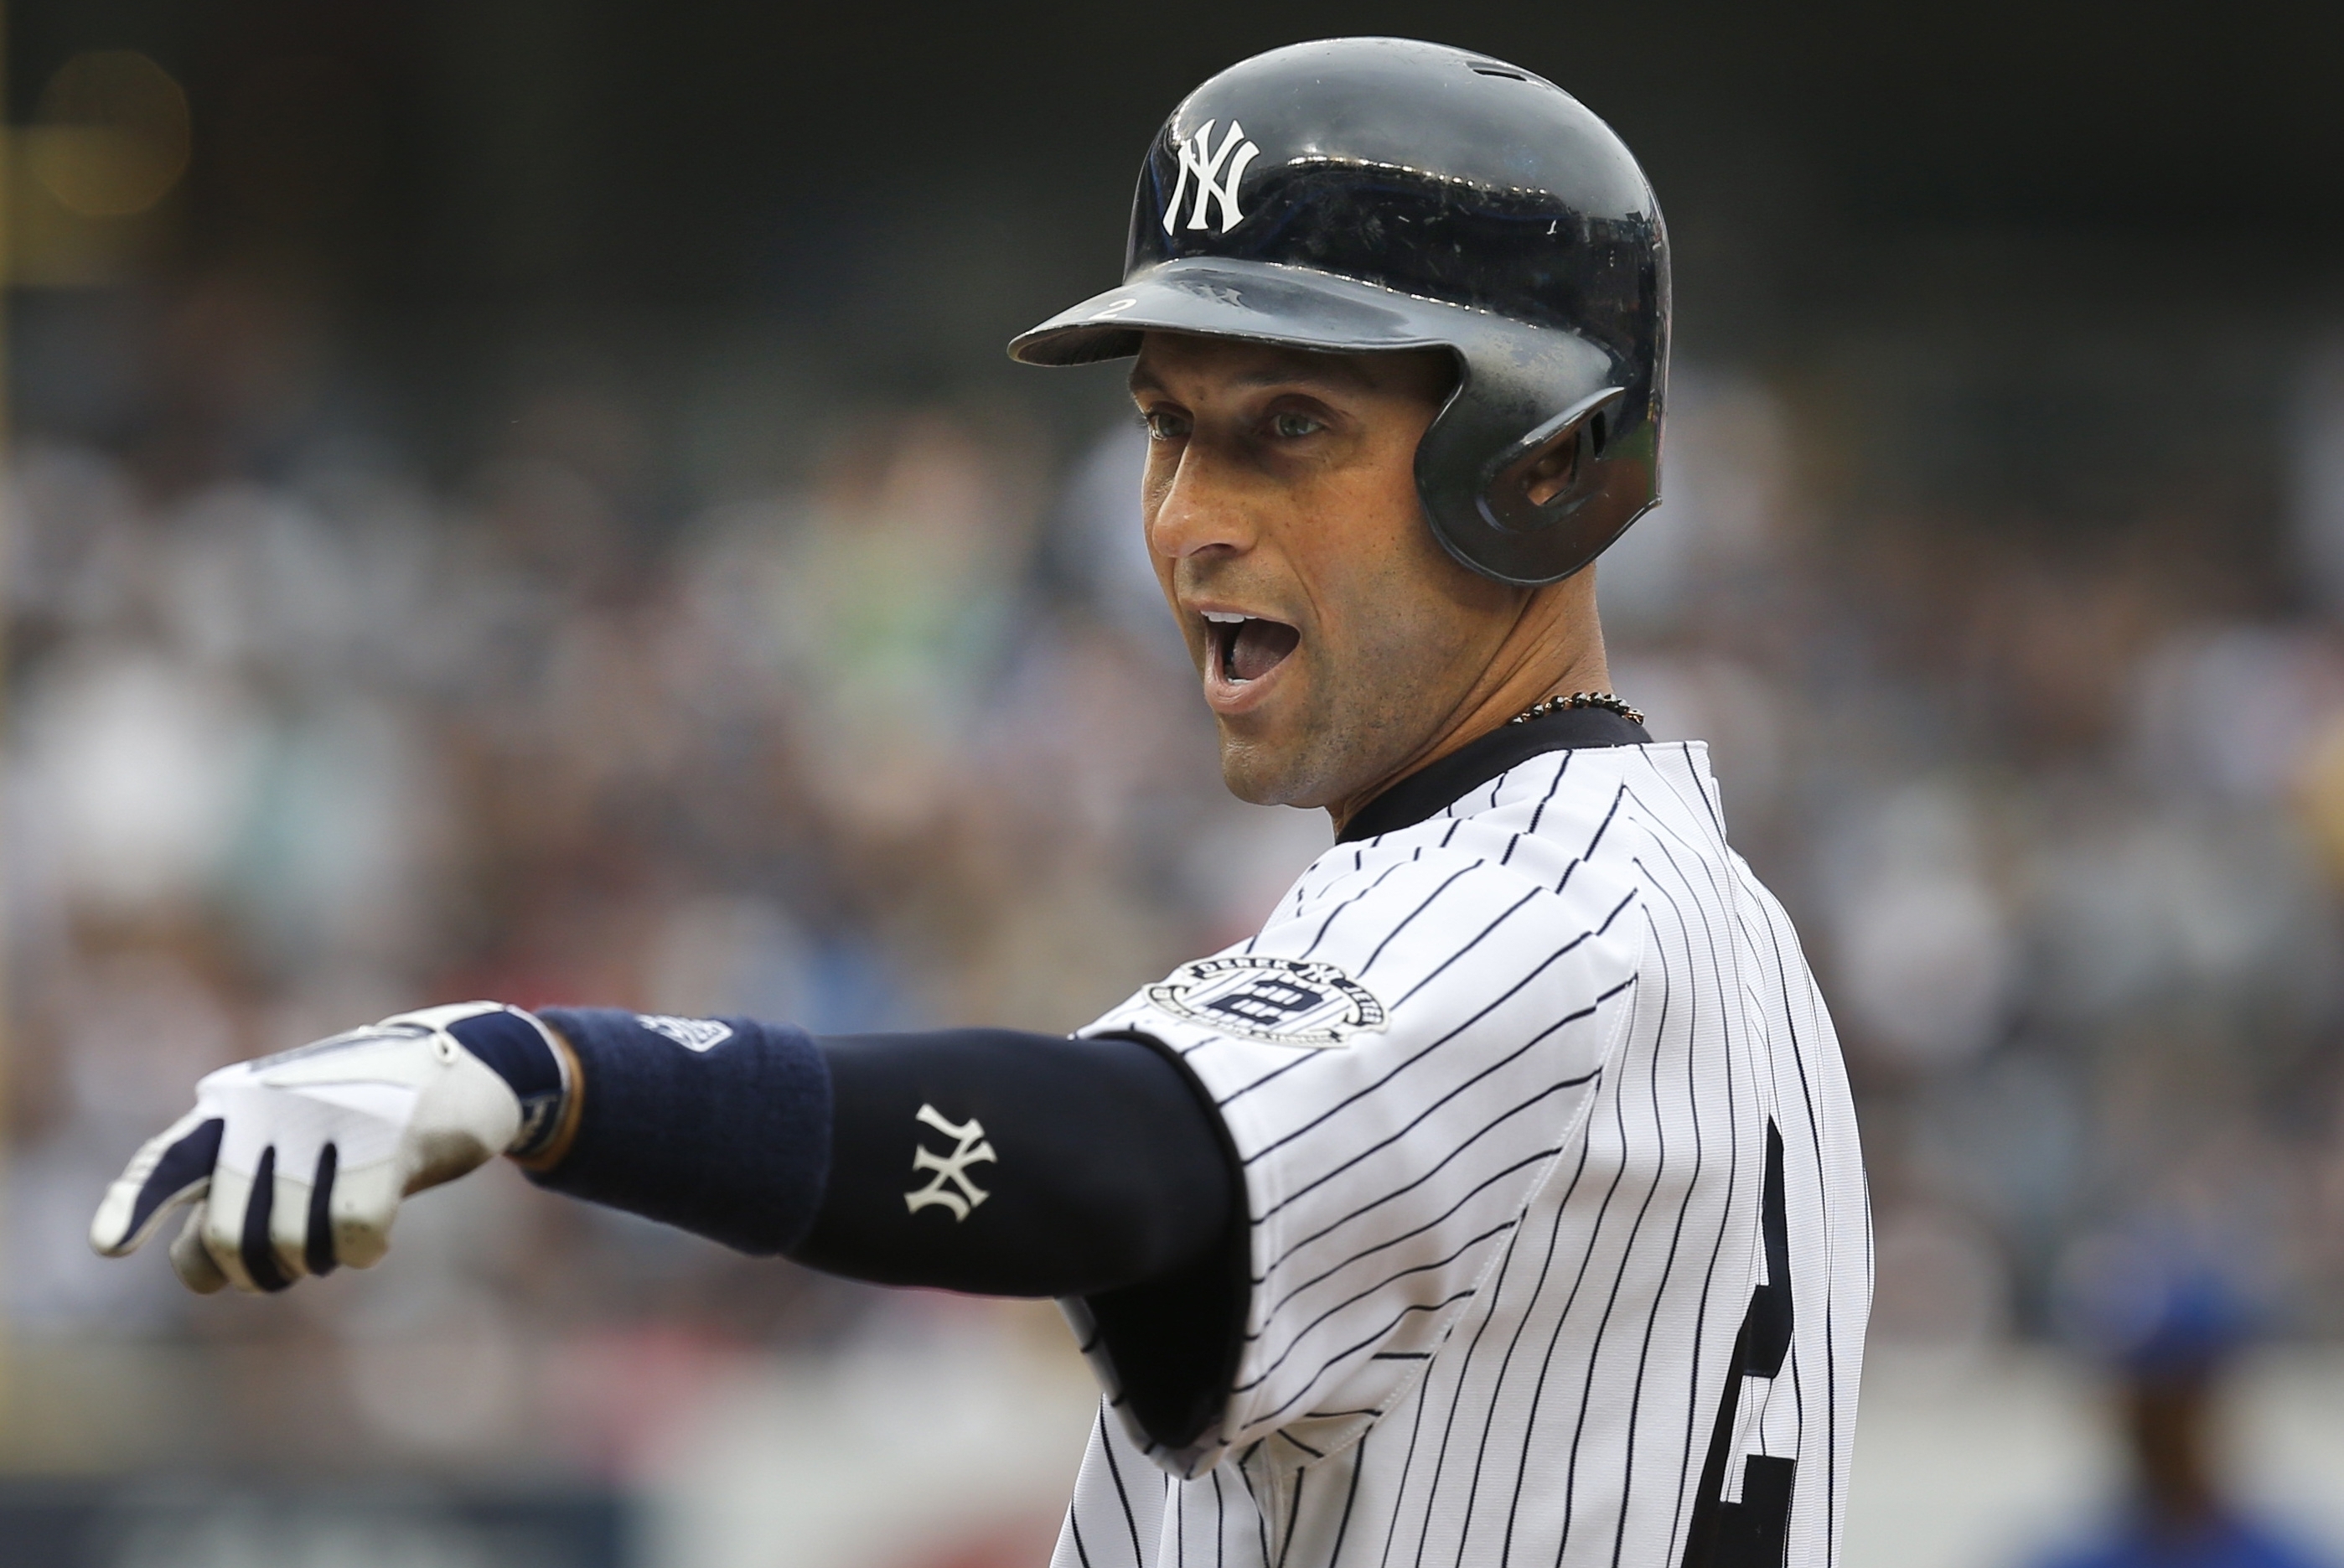 Why Derek Jeter remains admired after so many years